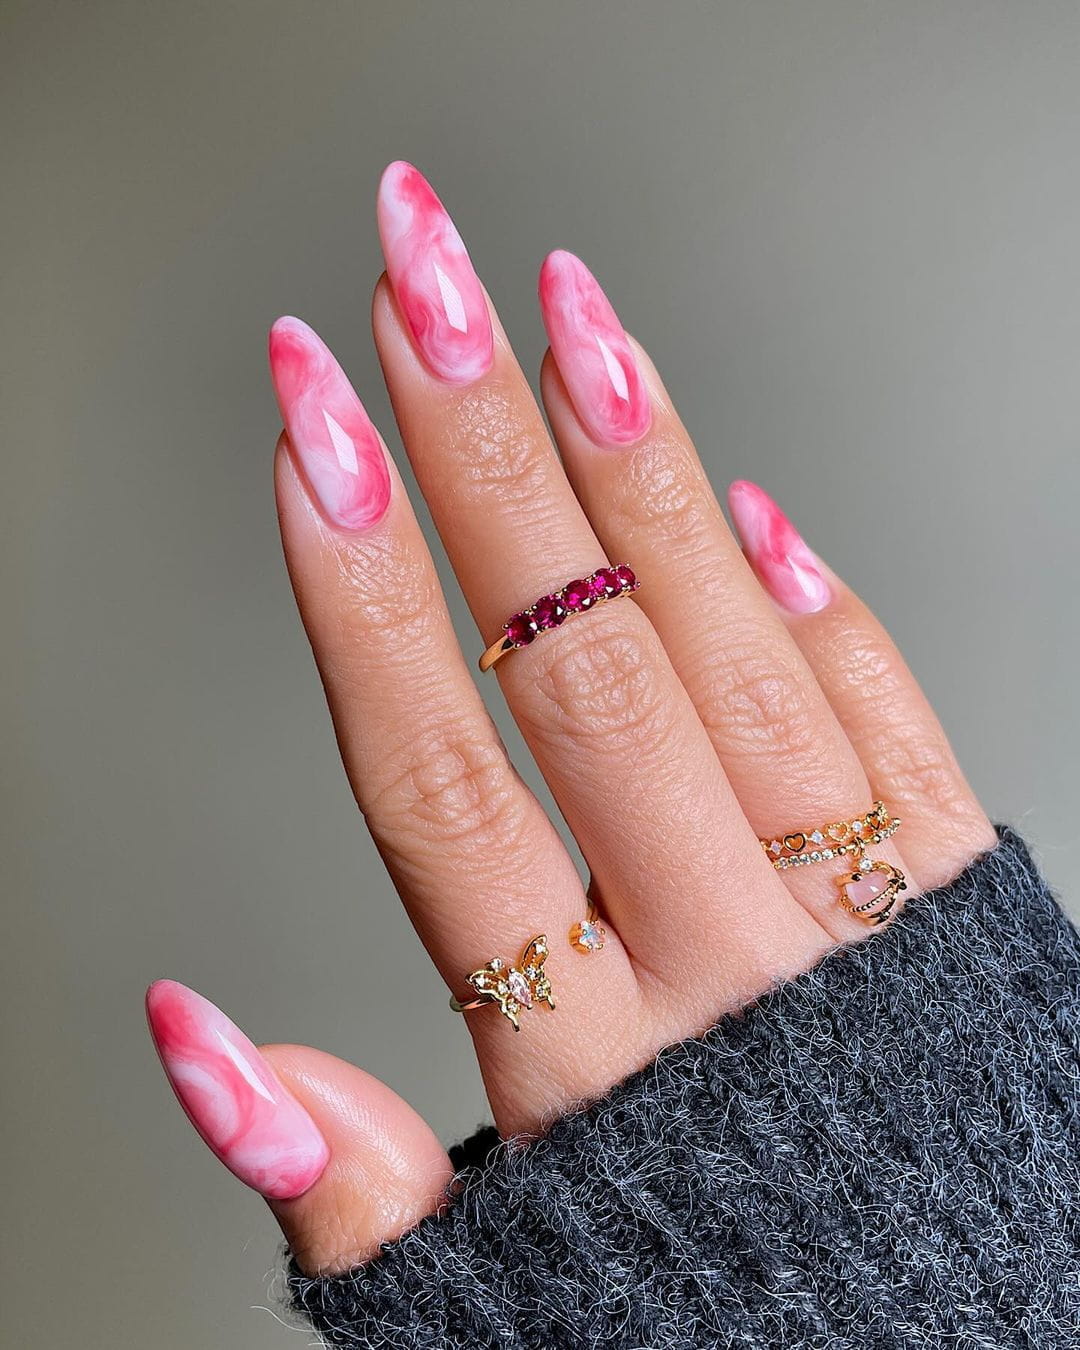 100 Of The Best Spring Inspired Nail Designs images 82